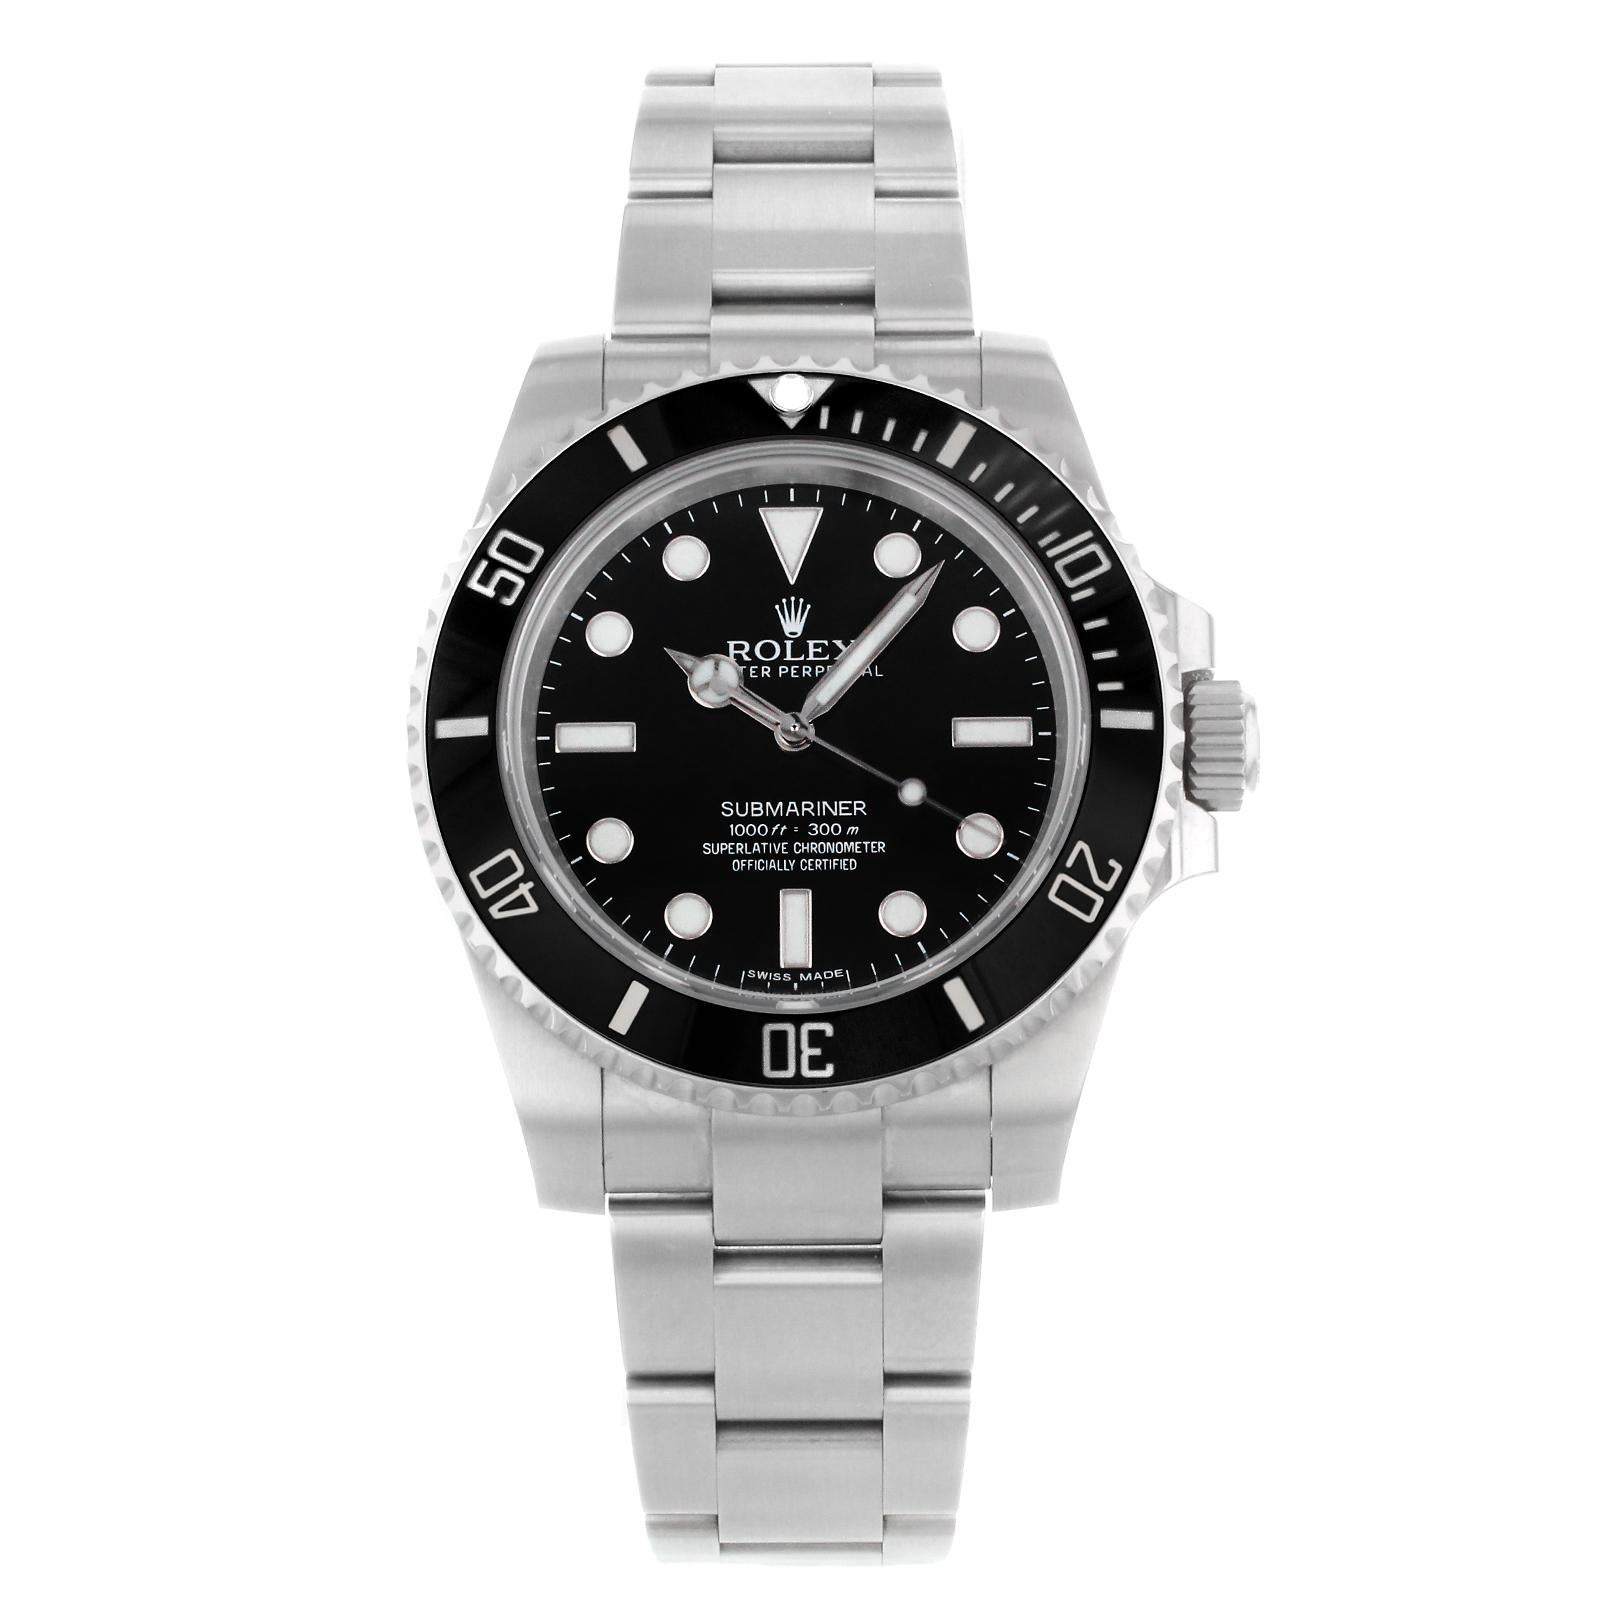 This pre-owned Rolex Submariner 114060  is a beautiful men's timepiece that is powered by a mechanical (automatic) movement which is cased in a stainless steel case. It has a round shape face, no features dial, and has hand sticks & dots style